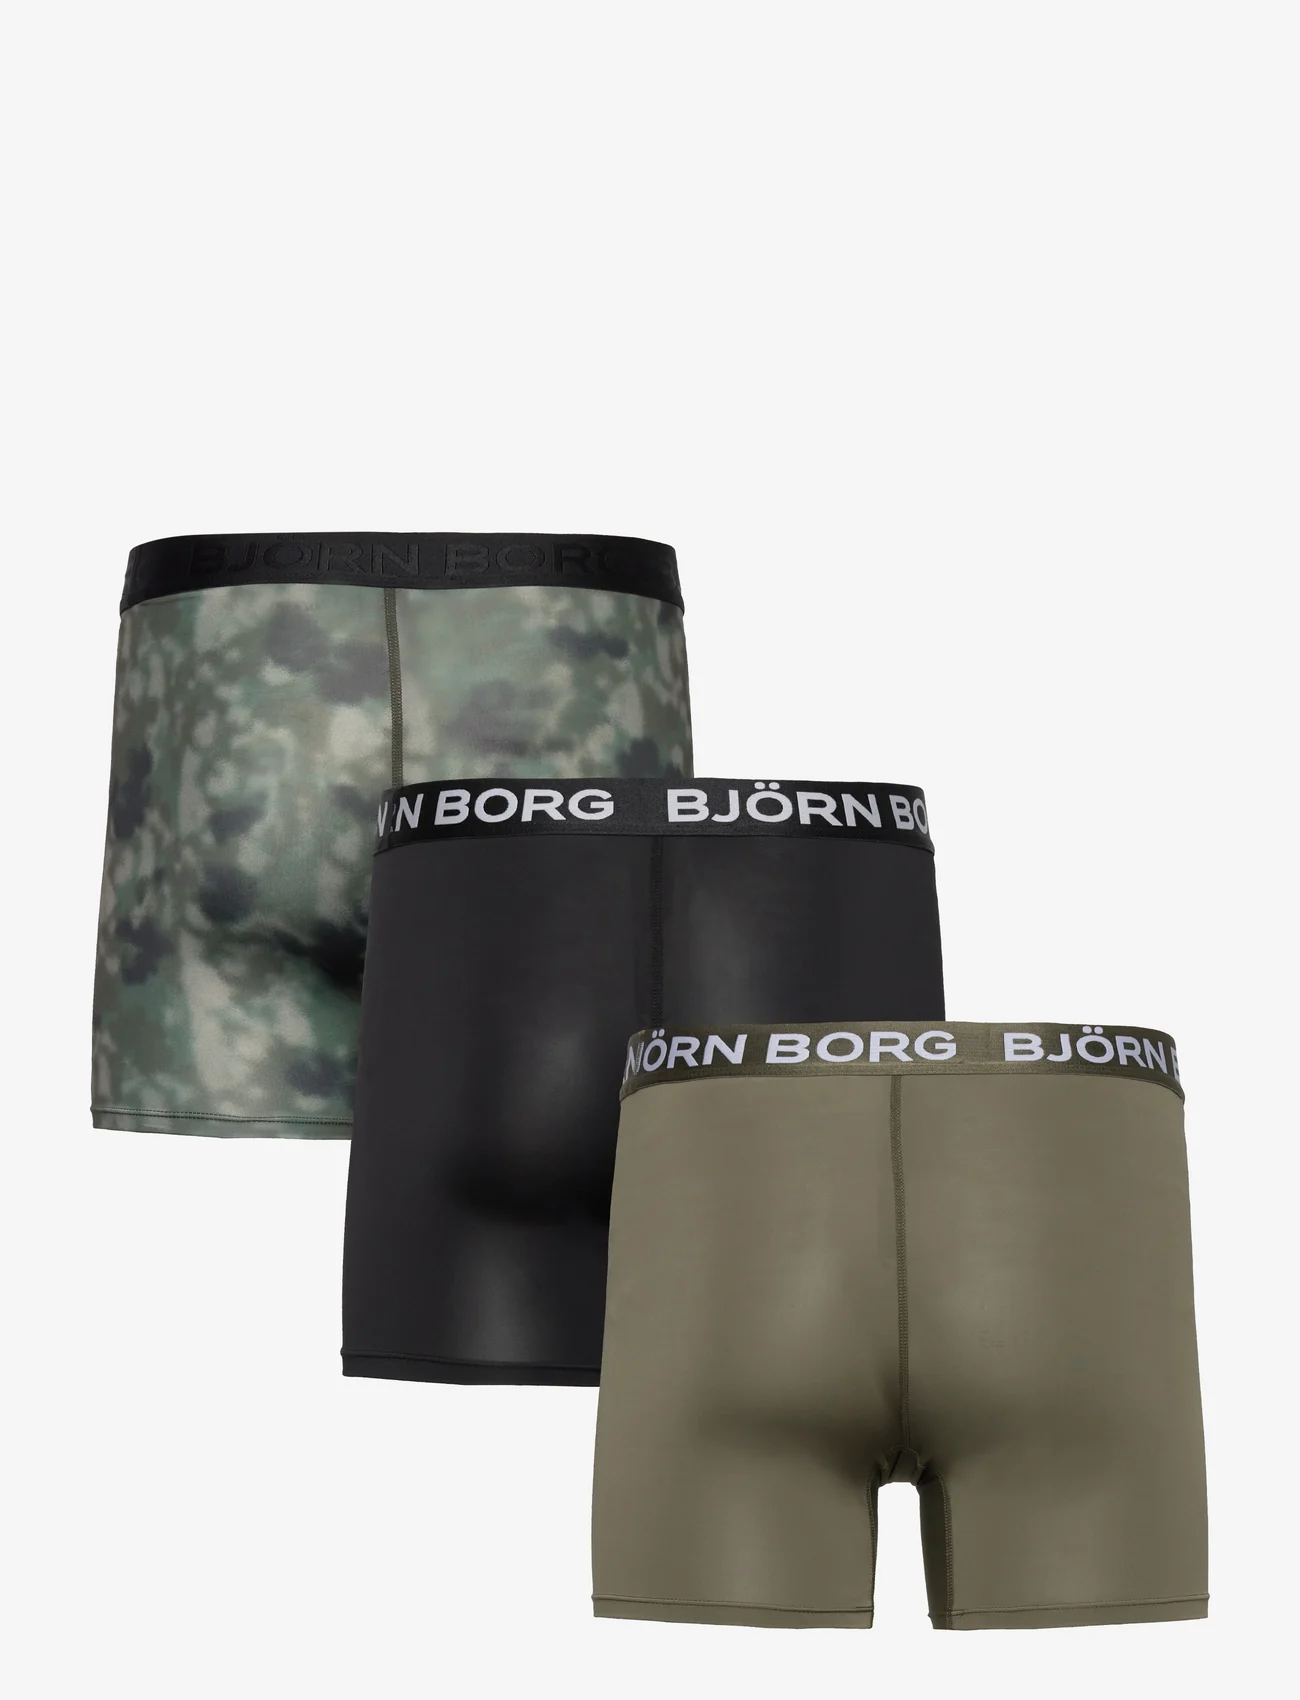 Björn Borg - PERFORMANCE BOXER 3p - nordic style - multipack 2 - 1